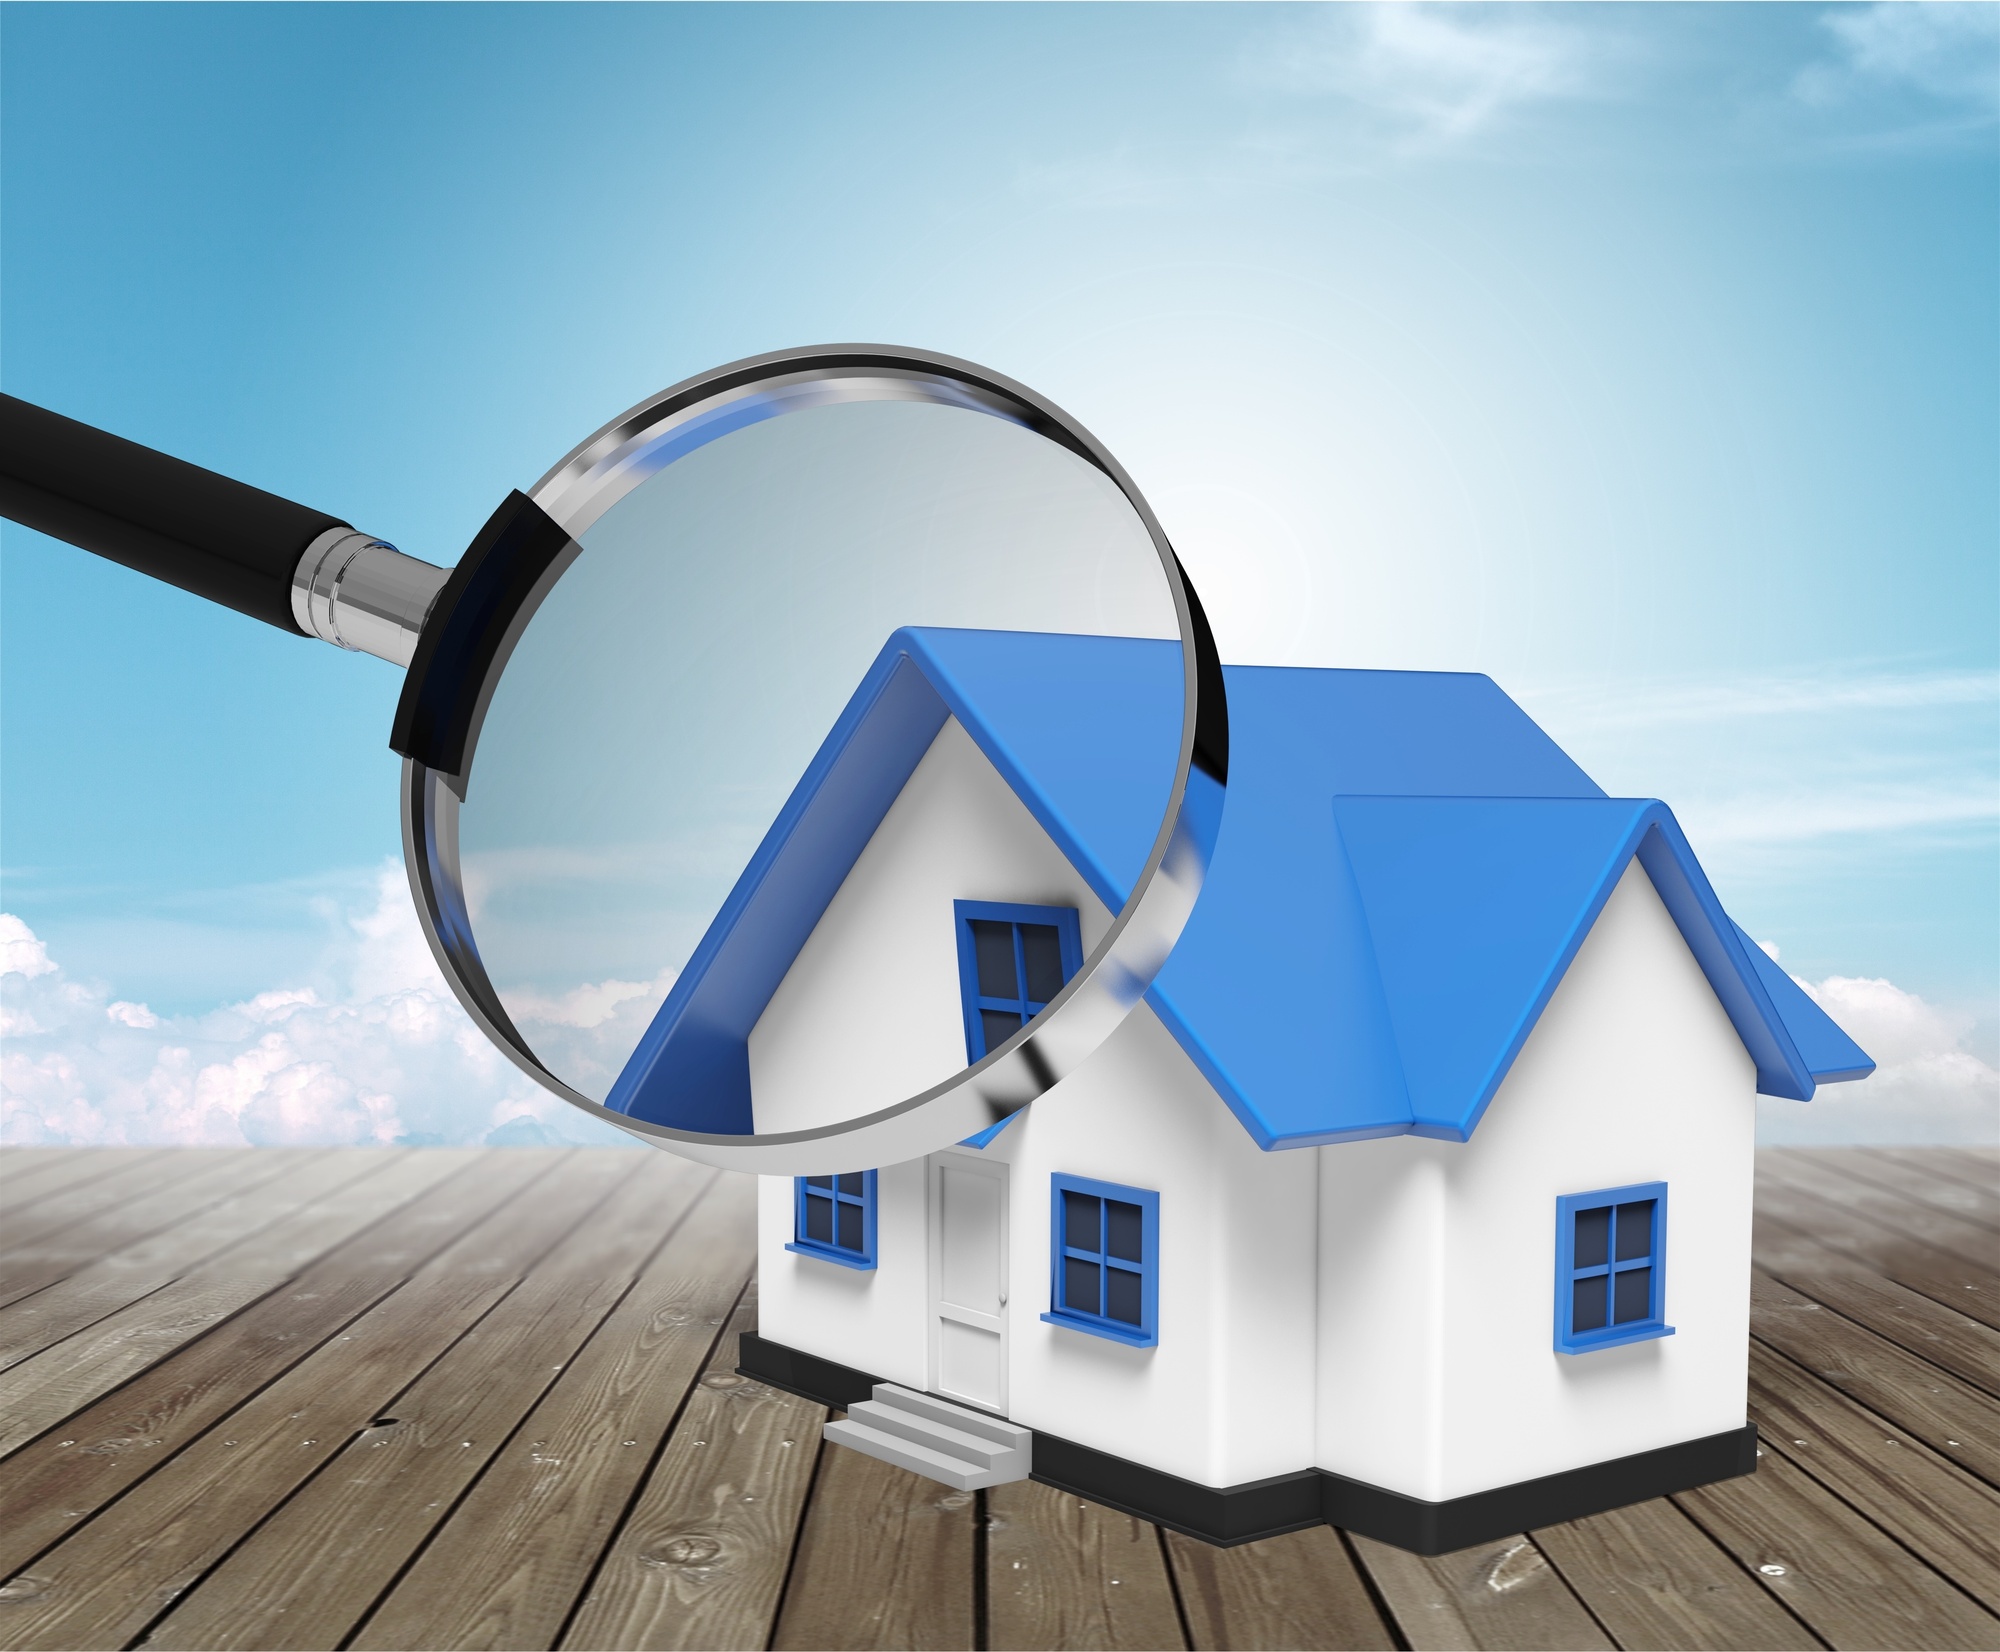 Are you planning to have a home inspection done? Do you want to know about the top questions to ask during a home inspection? Read on to learn more about them.